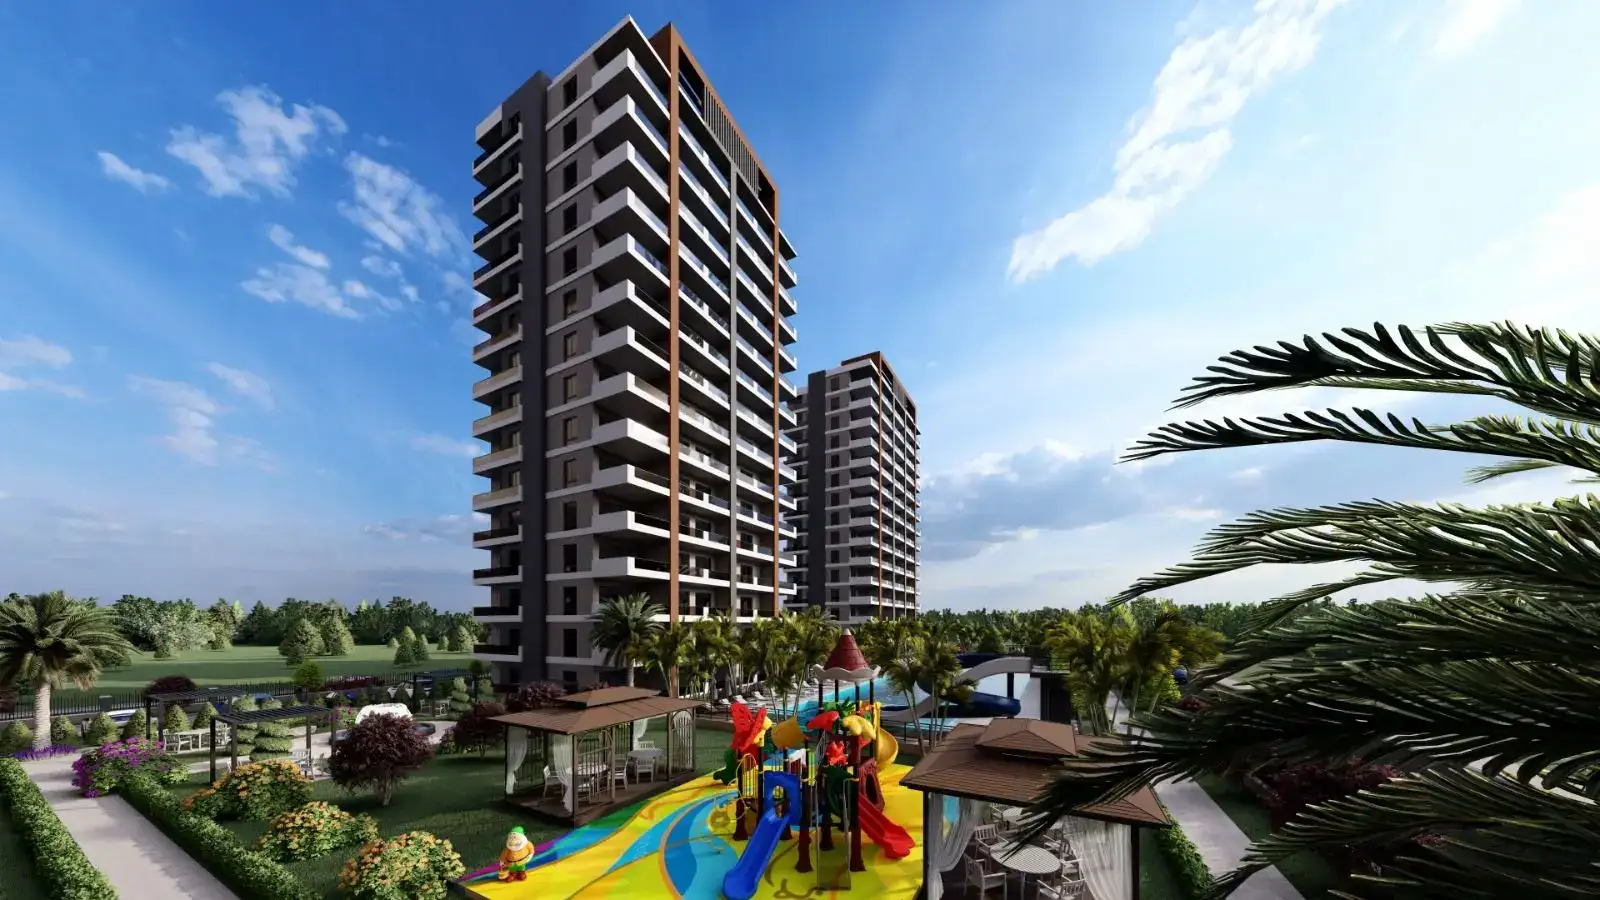 NEW PROJECT OF RESIDENTIAL COMPLEX IN MERSIN ARPAÇBAHŞİŞ DISTRICT